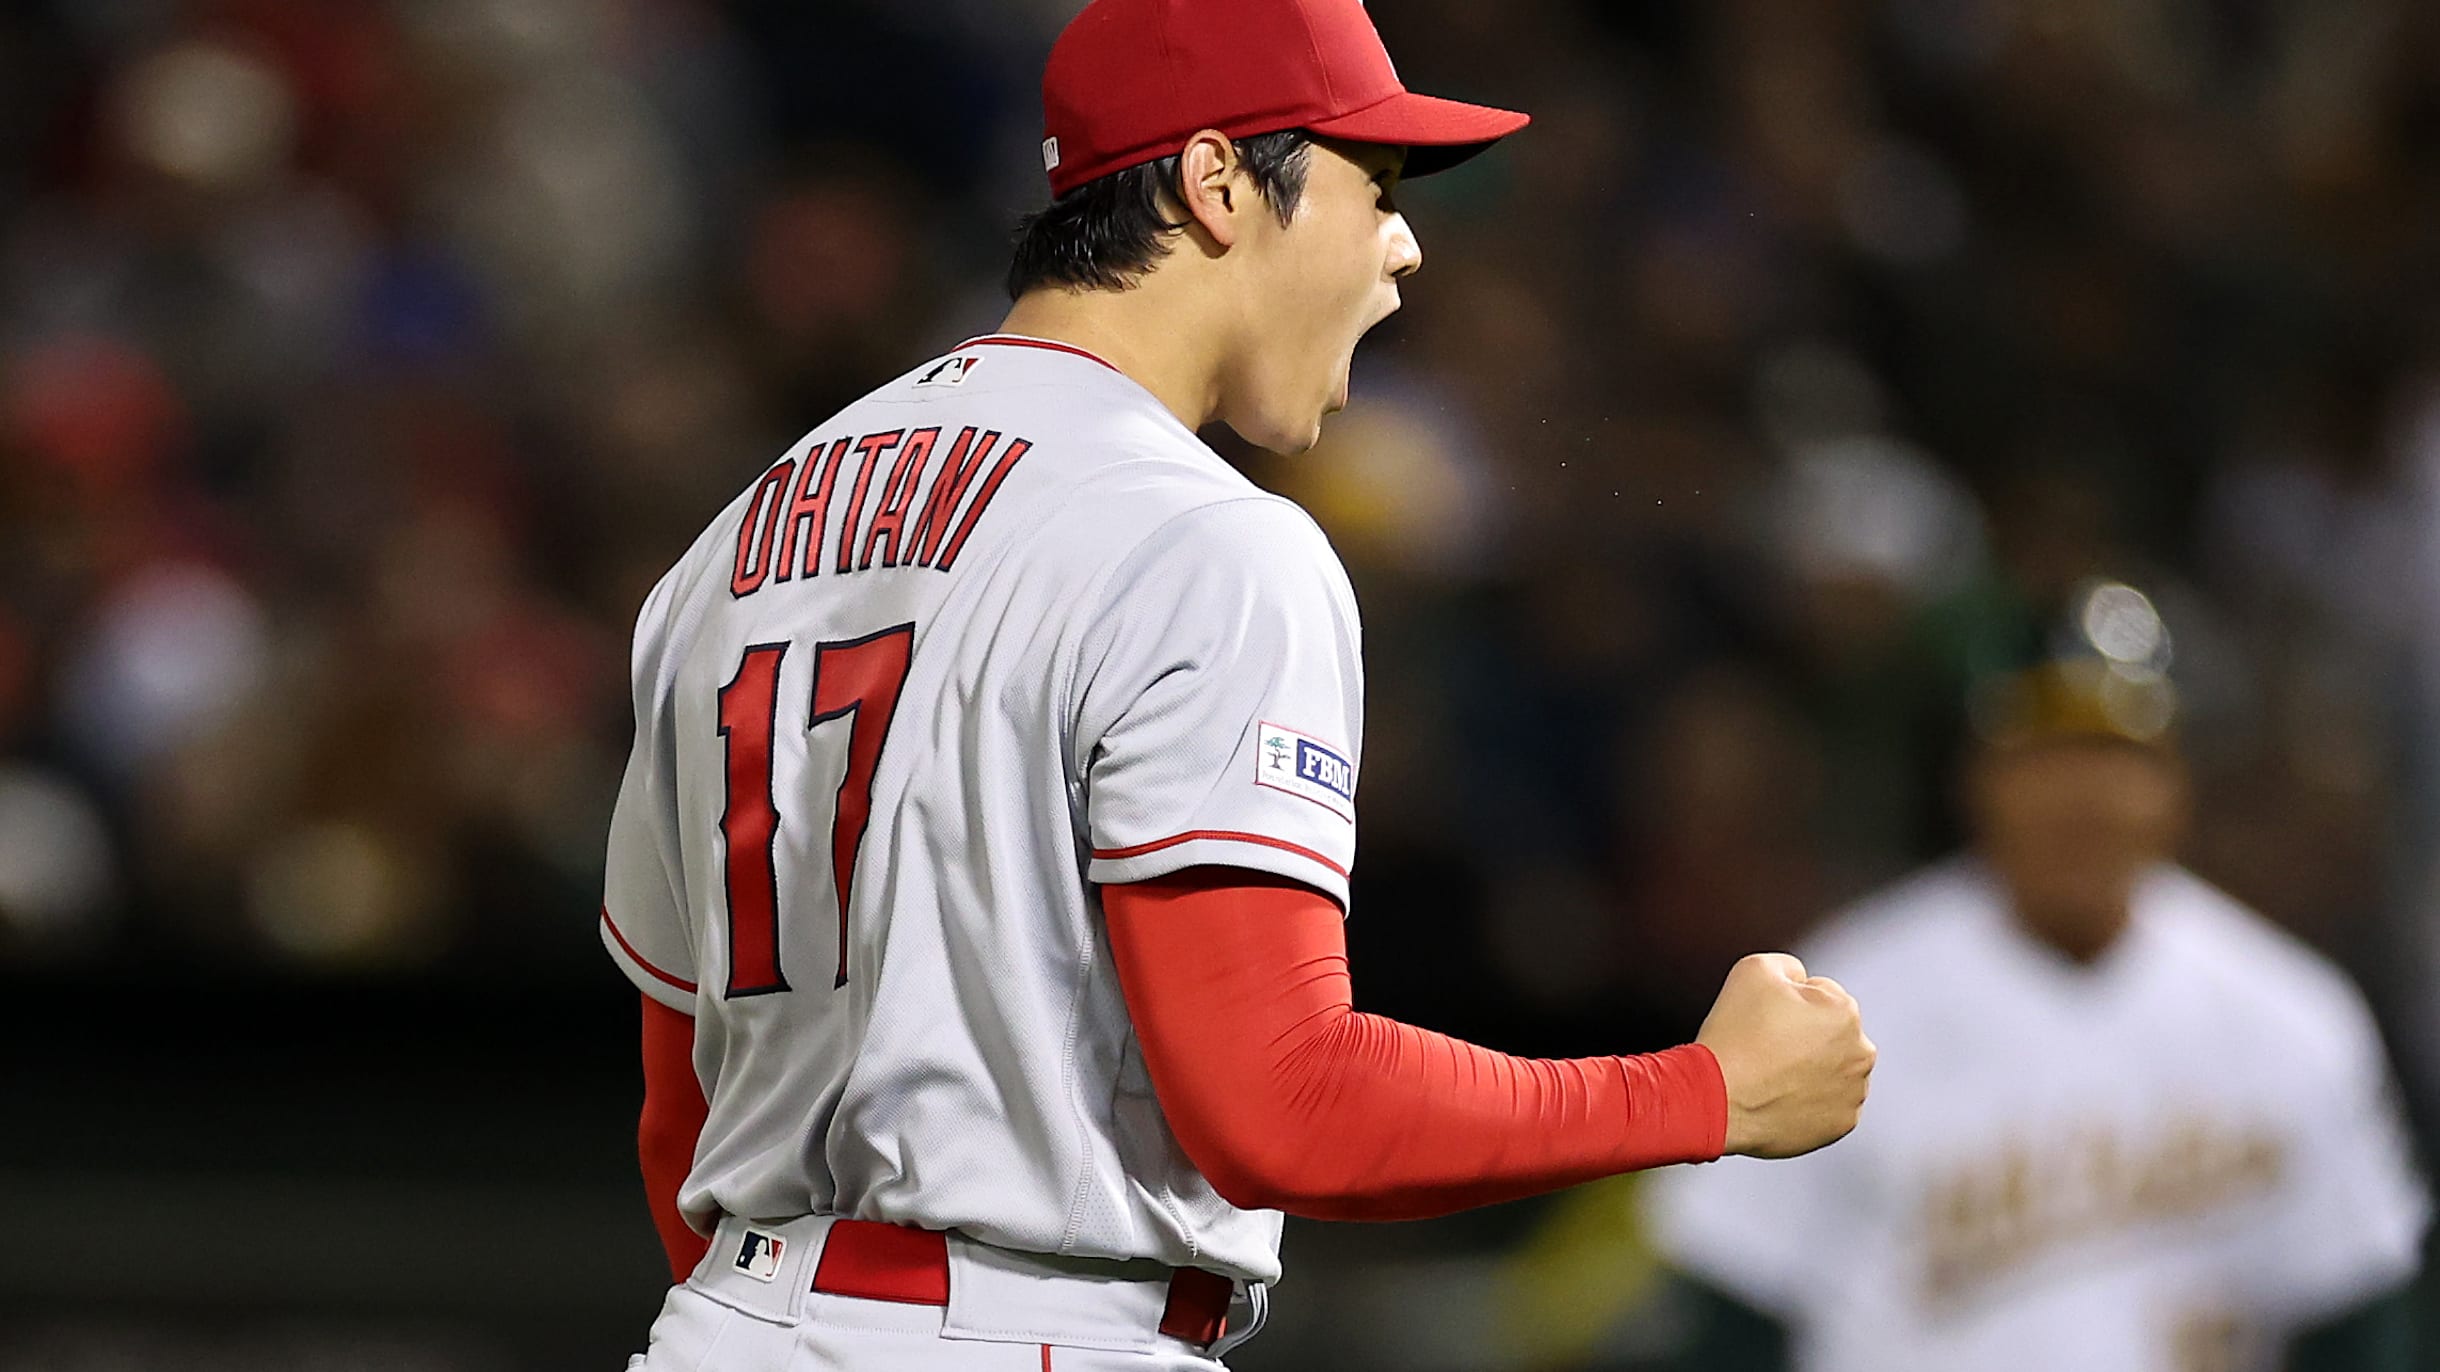 Shohei Ohtani Goes 1 for 3 in Angels' Loss - The Japan News